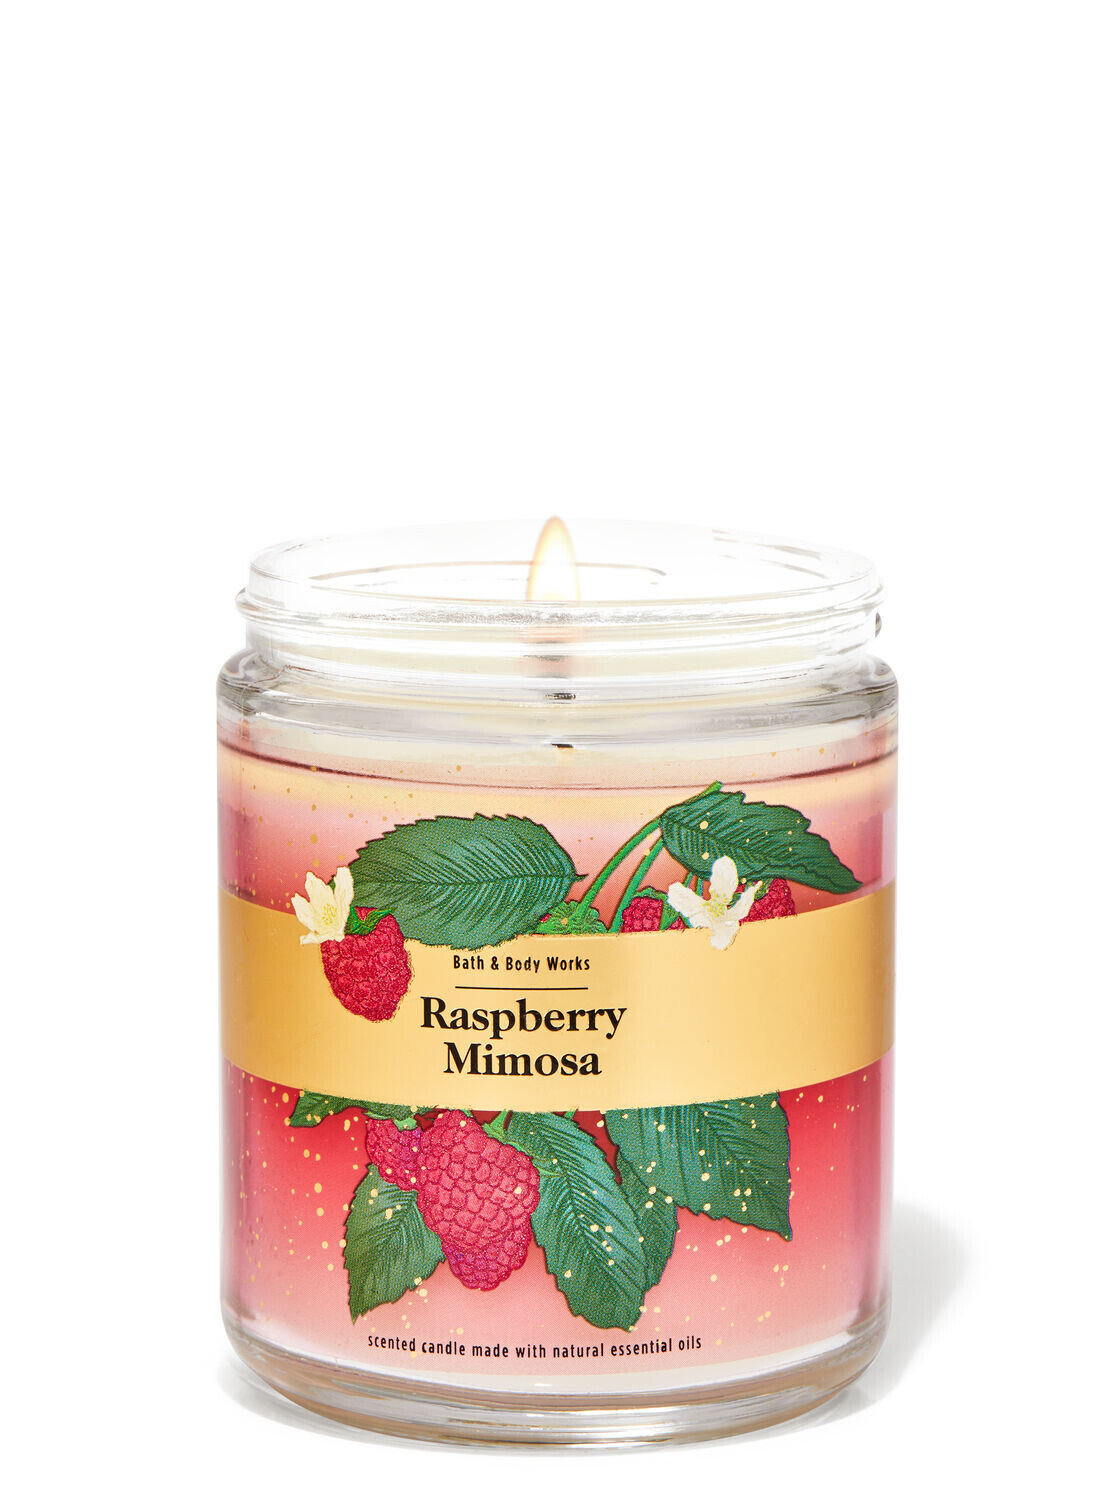 Bath and body works single wick candle- RASPBERRY MIMOSA